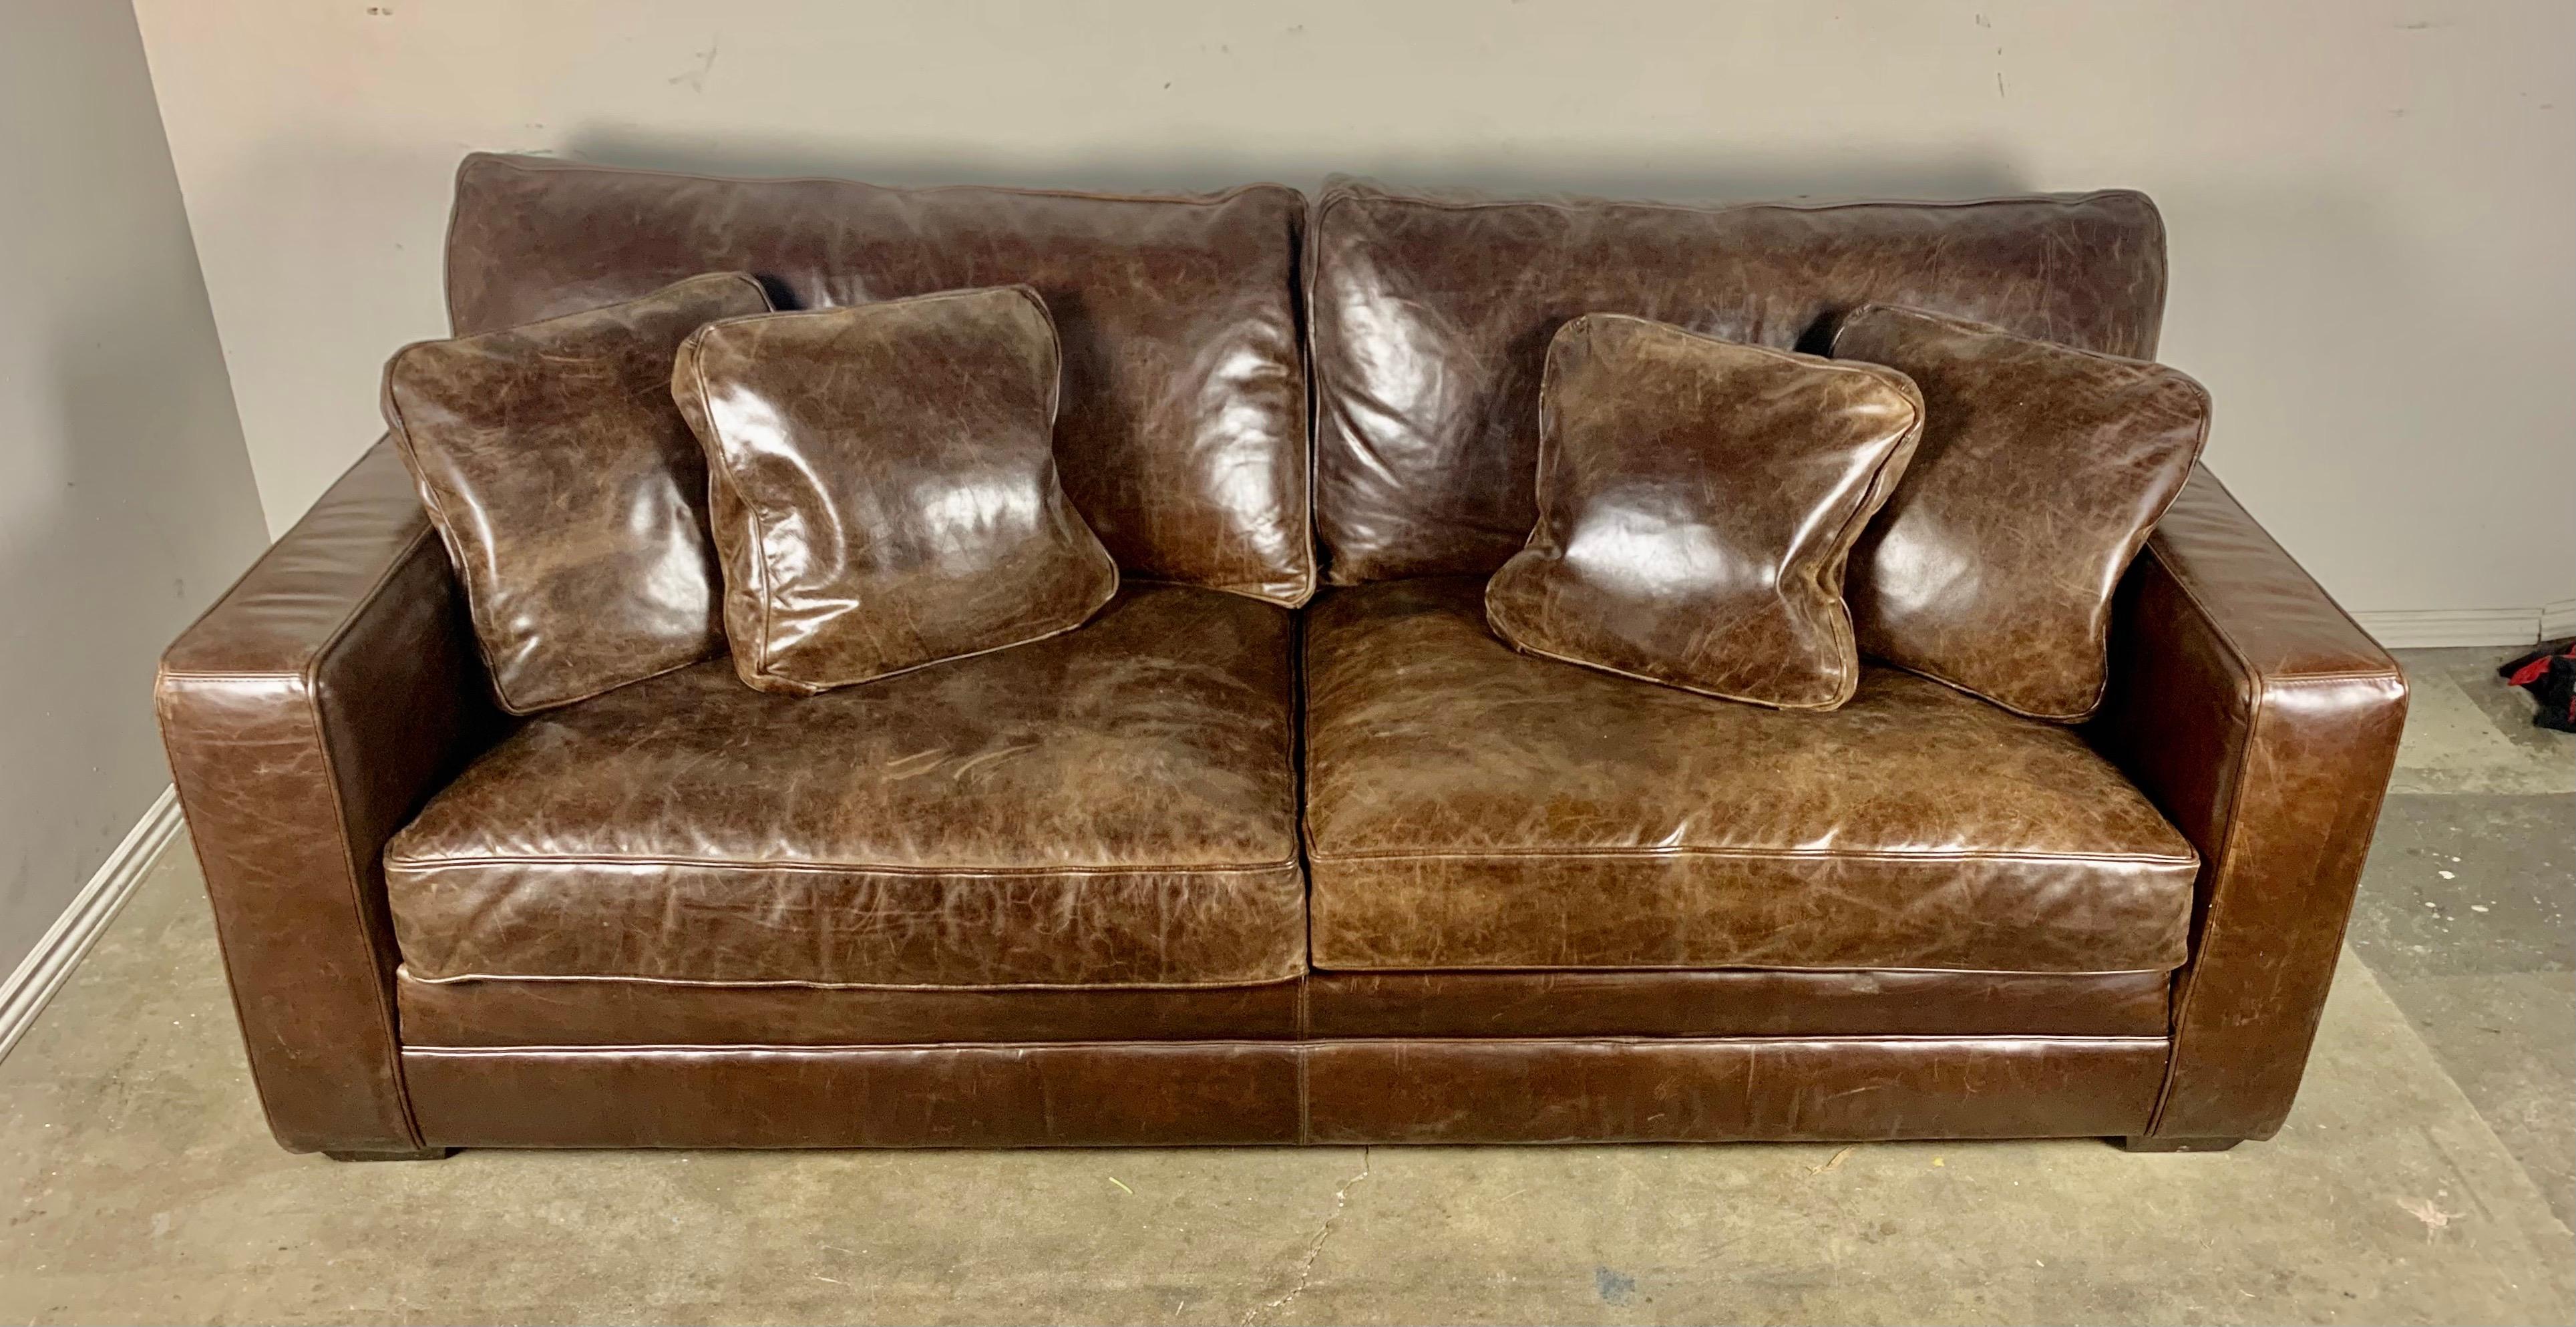 Authentic vintage leather sofa with loose cushions and leather throw pillows included.